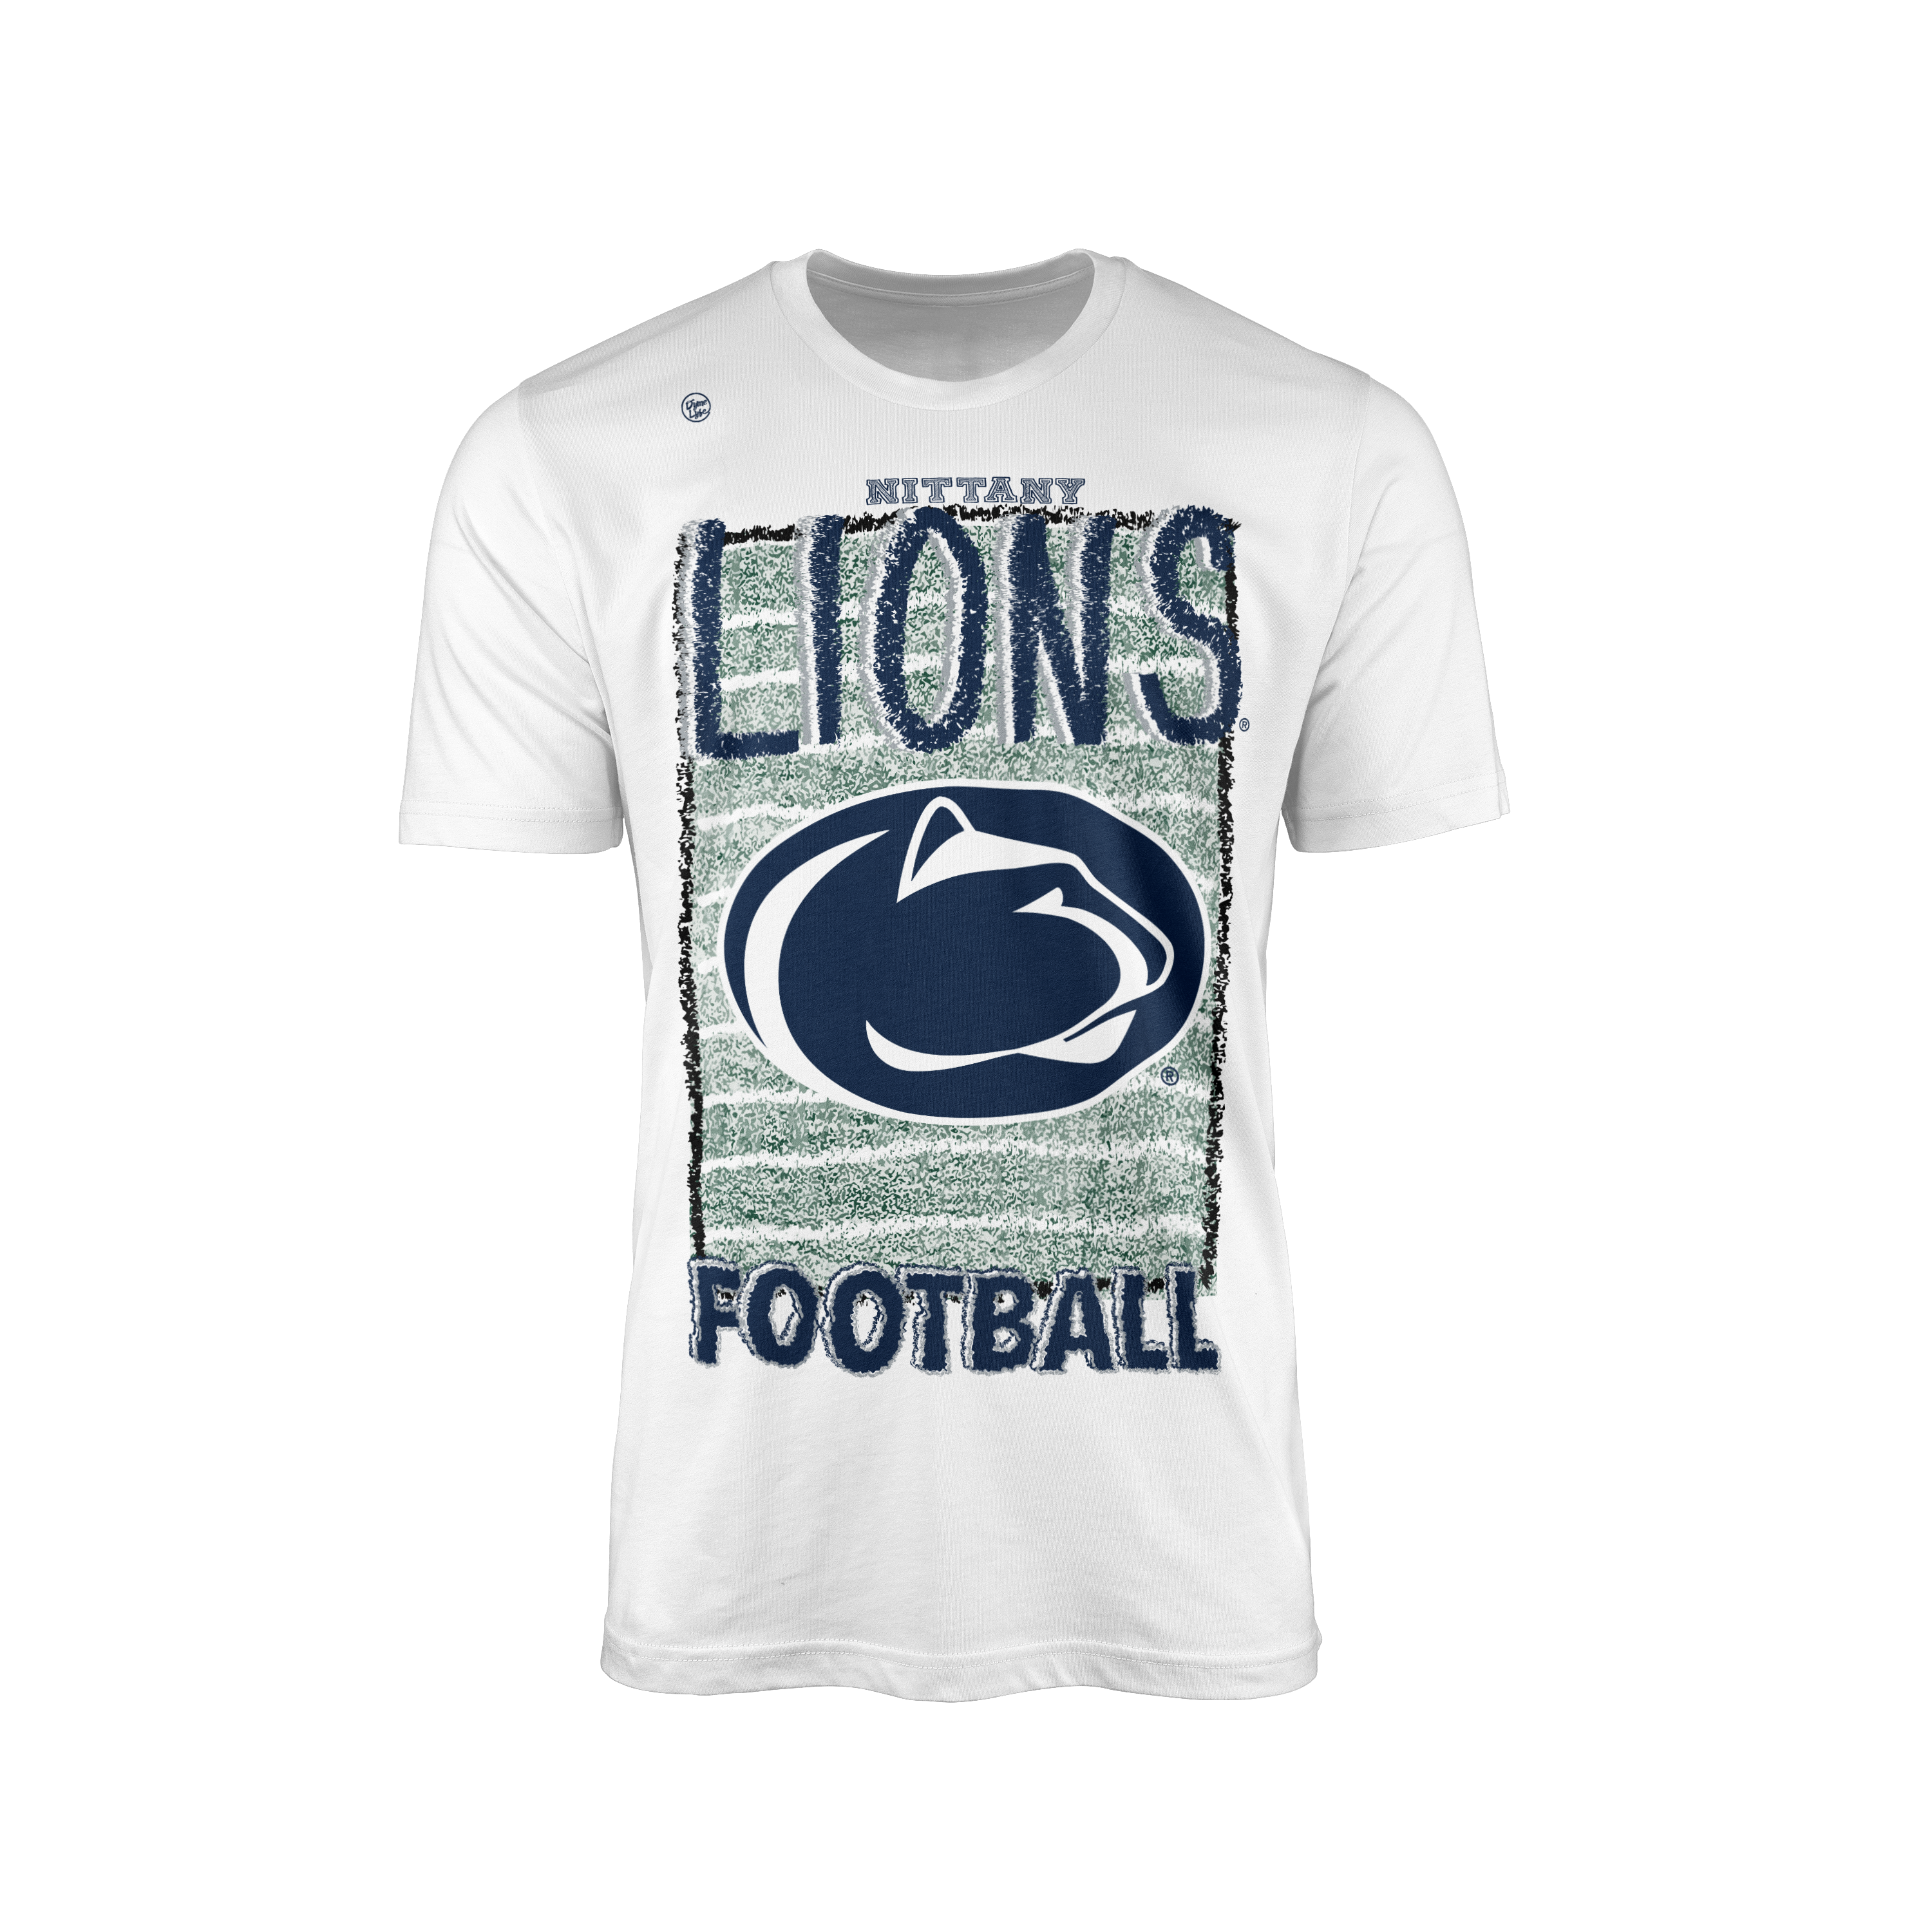 Penn State Nittany Lions Men’s Crayon Tee